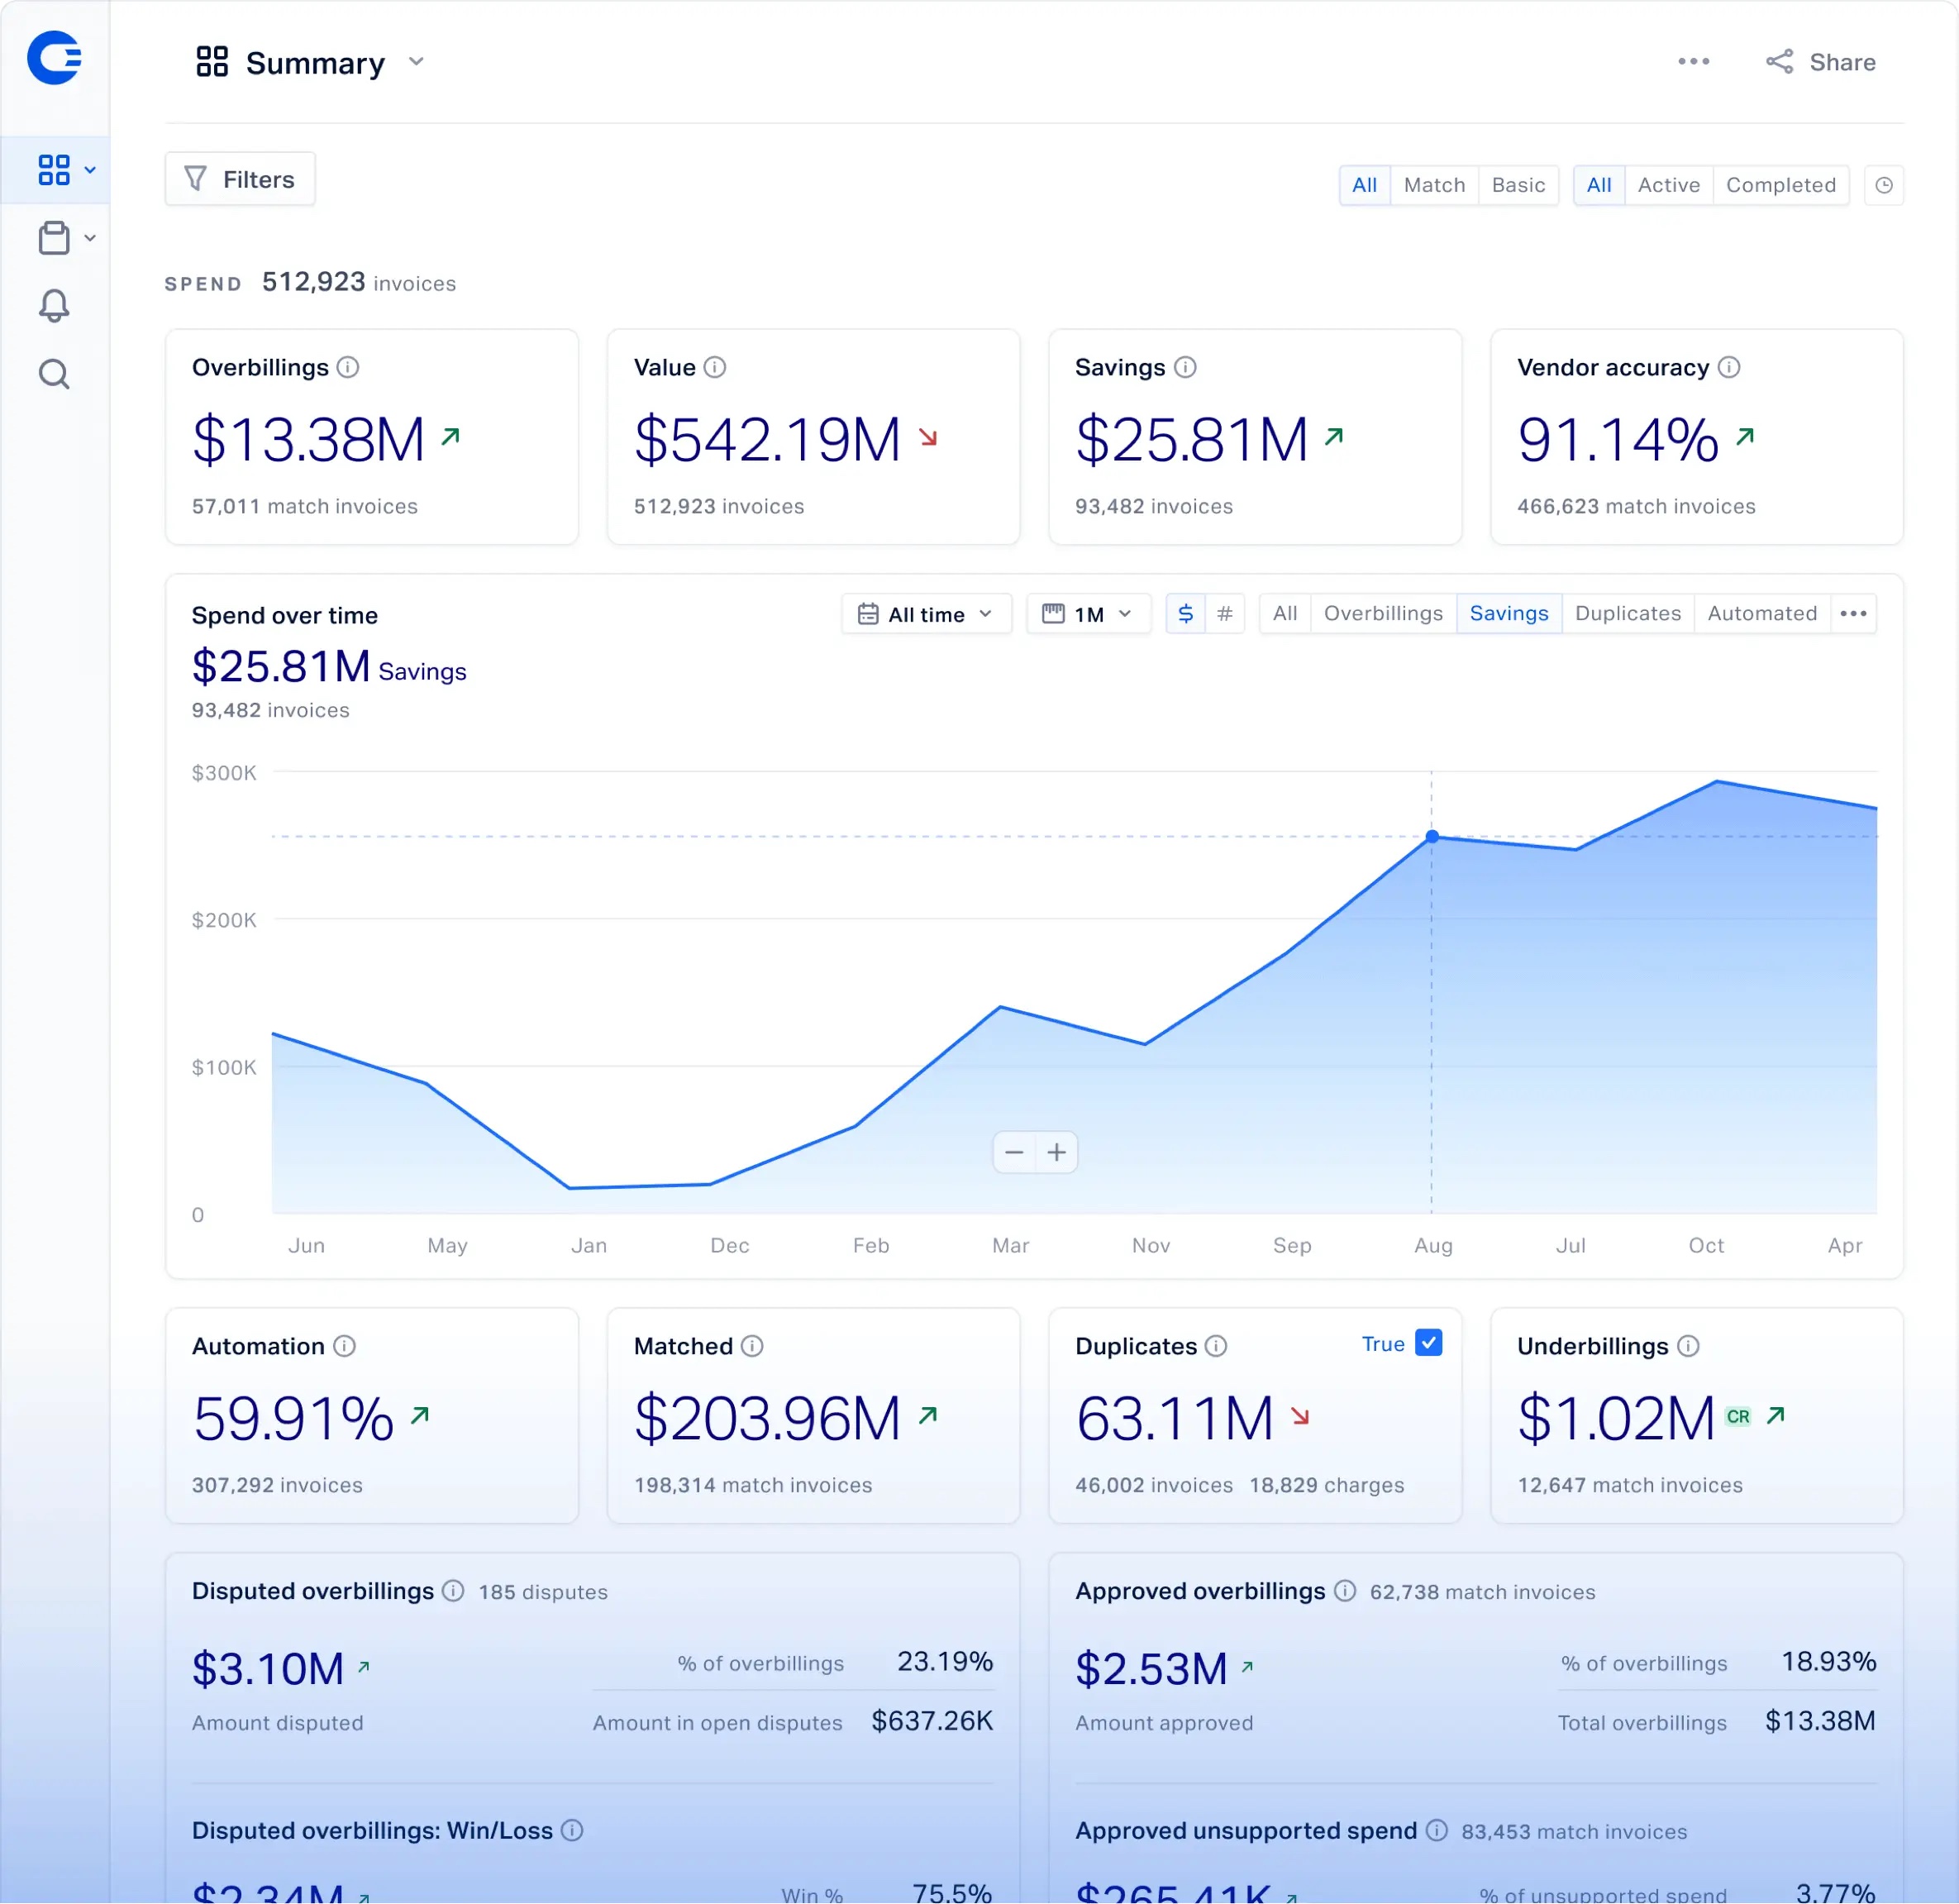 OpenEnvoy Dashboard: OpenEnvoy uses enterprise-grade AI technology to provide finance teams with complete control over their payment processes. Our AP automation solution eliminates overpayments, controls fraud, and provides total visibility into spend.